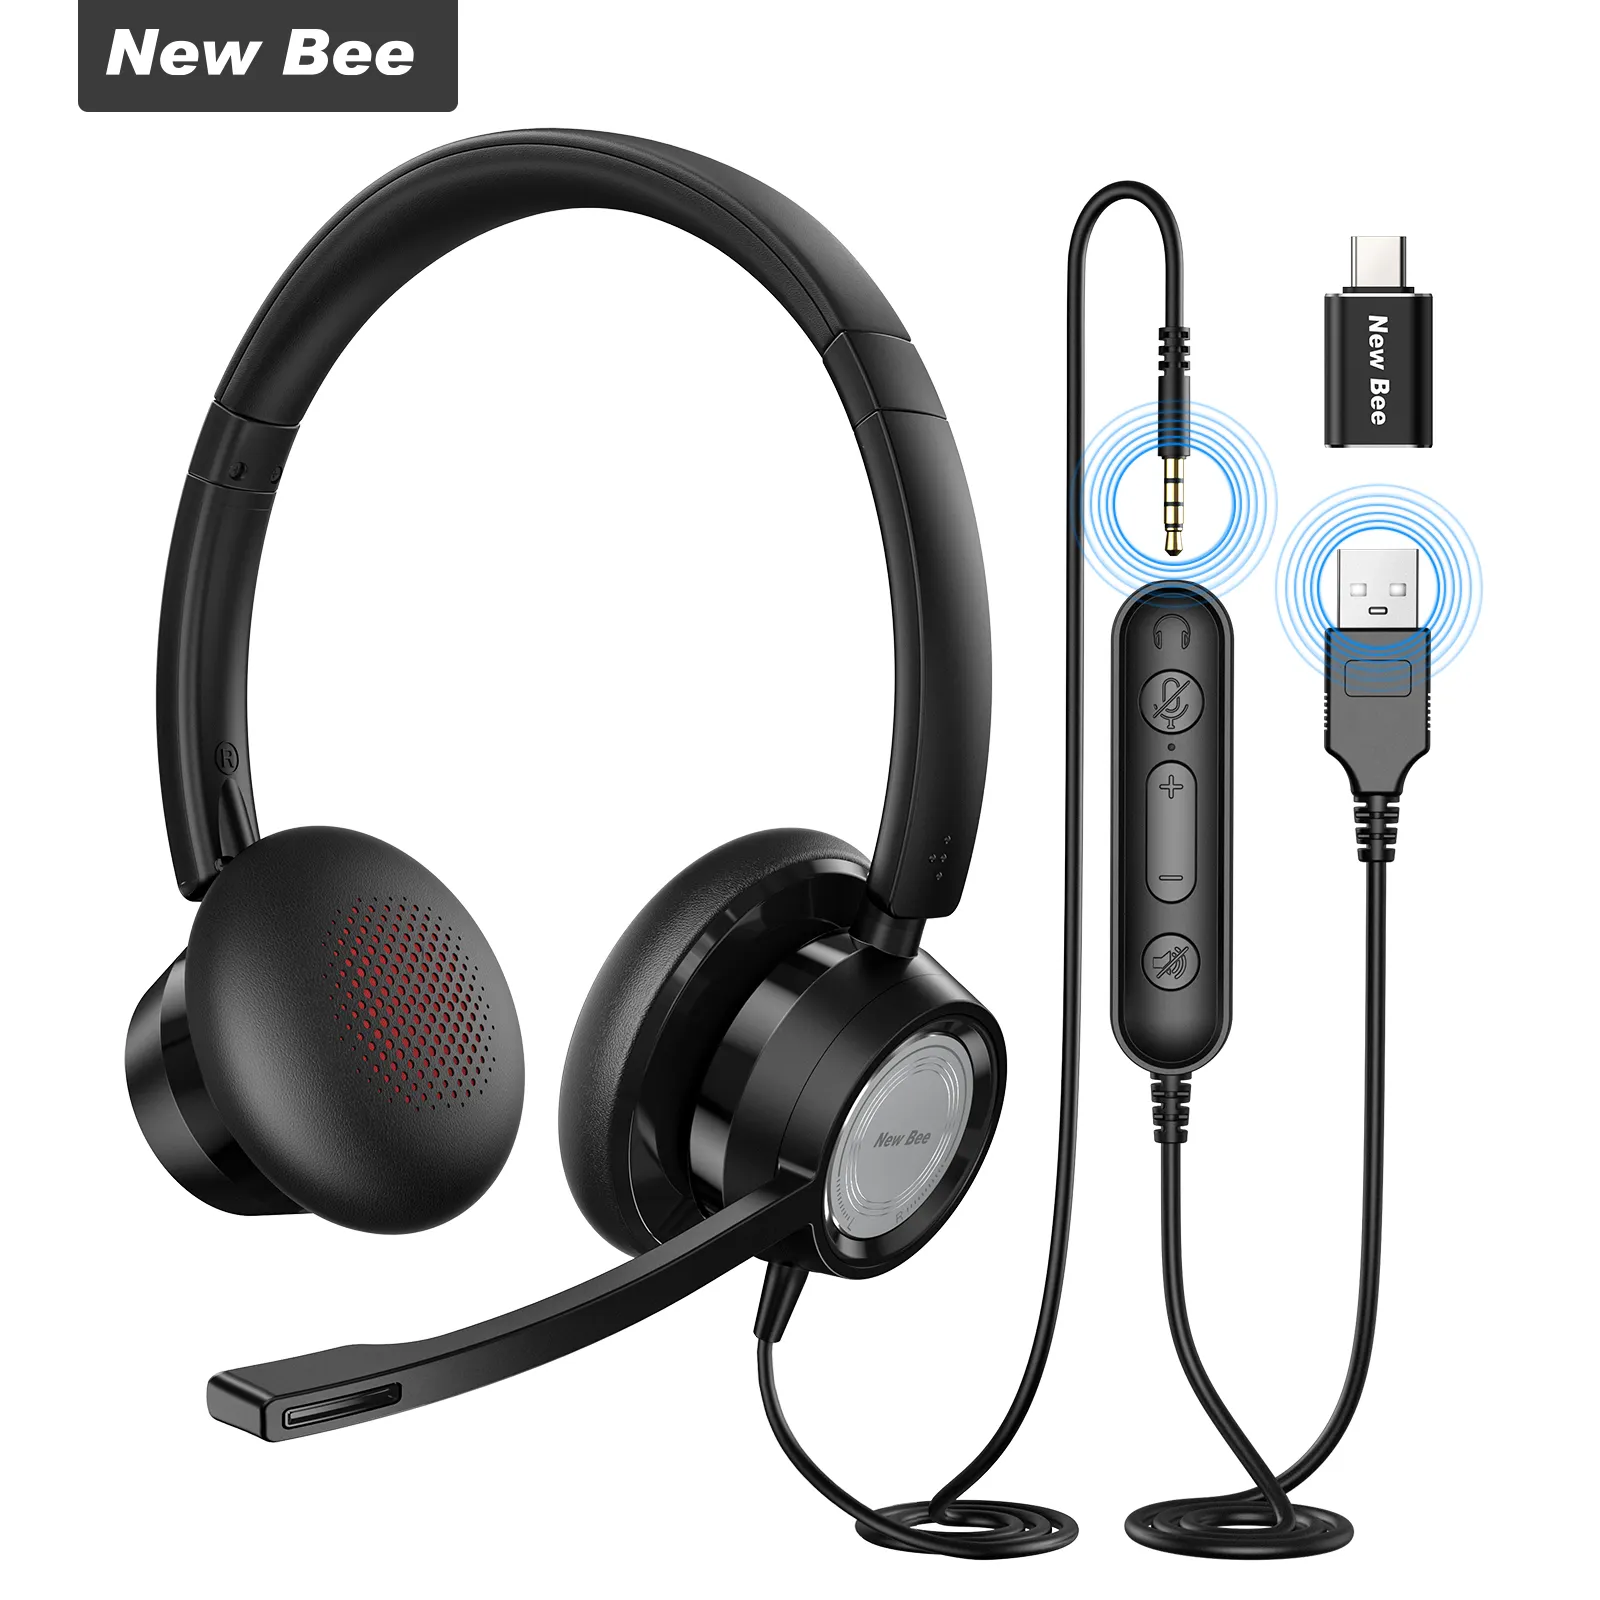 New Bee Usb Headset With 270 Rotatable Microphone Computer Headset Controls Call Center Stereo Wired Pc Headset